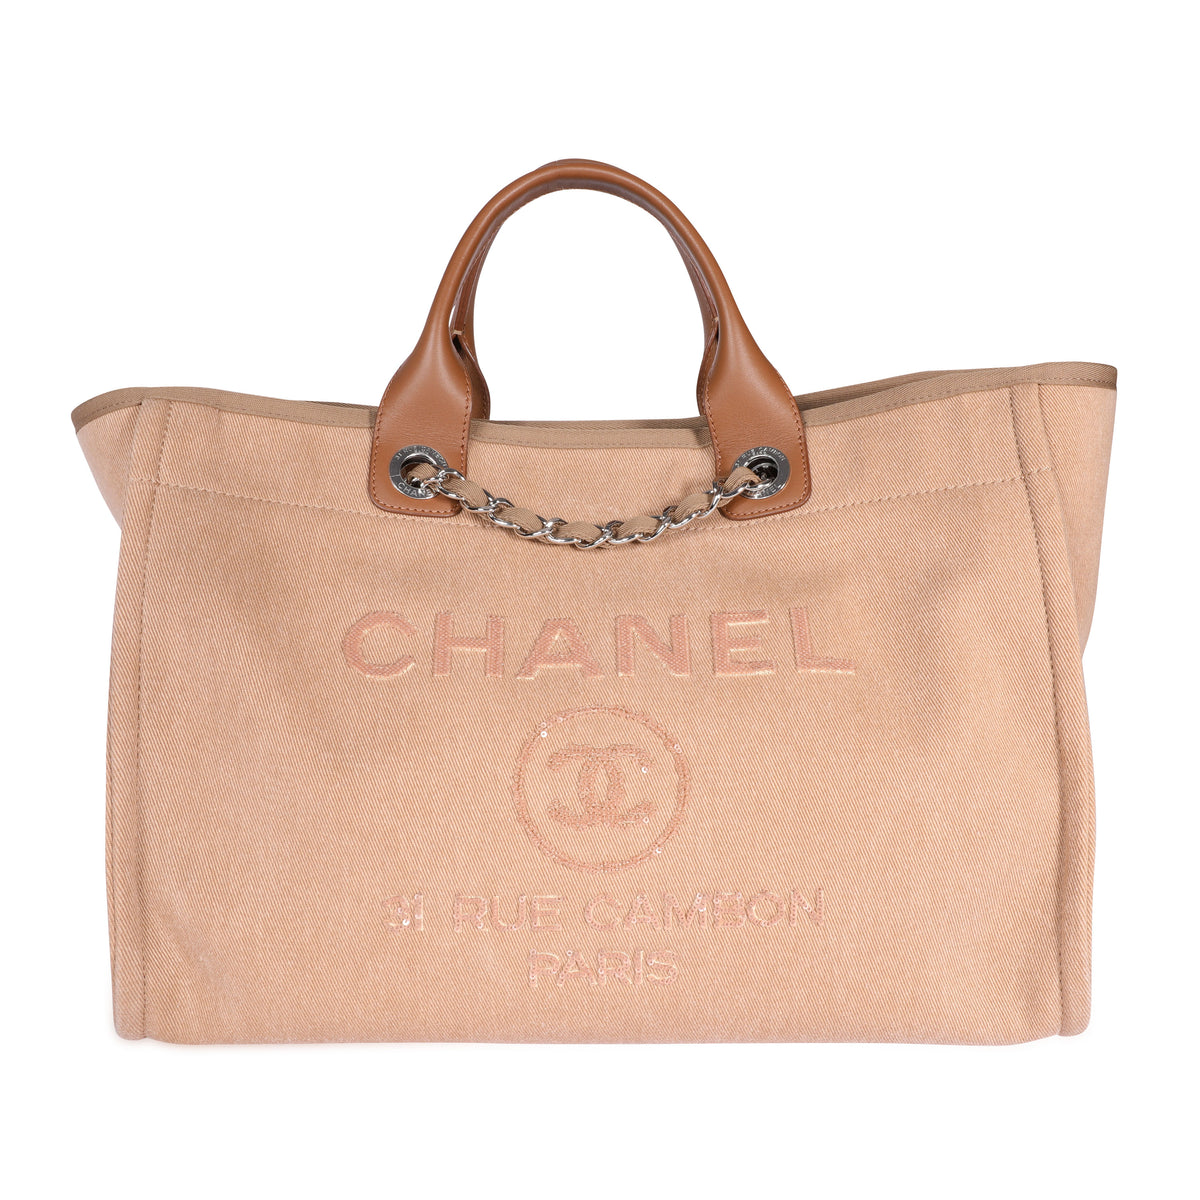 Chanel Camel Canvas & Sequins Large Deauville Tote by WP Diamonds